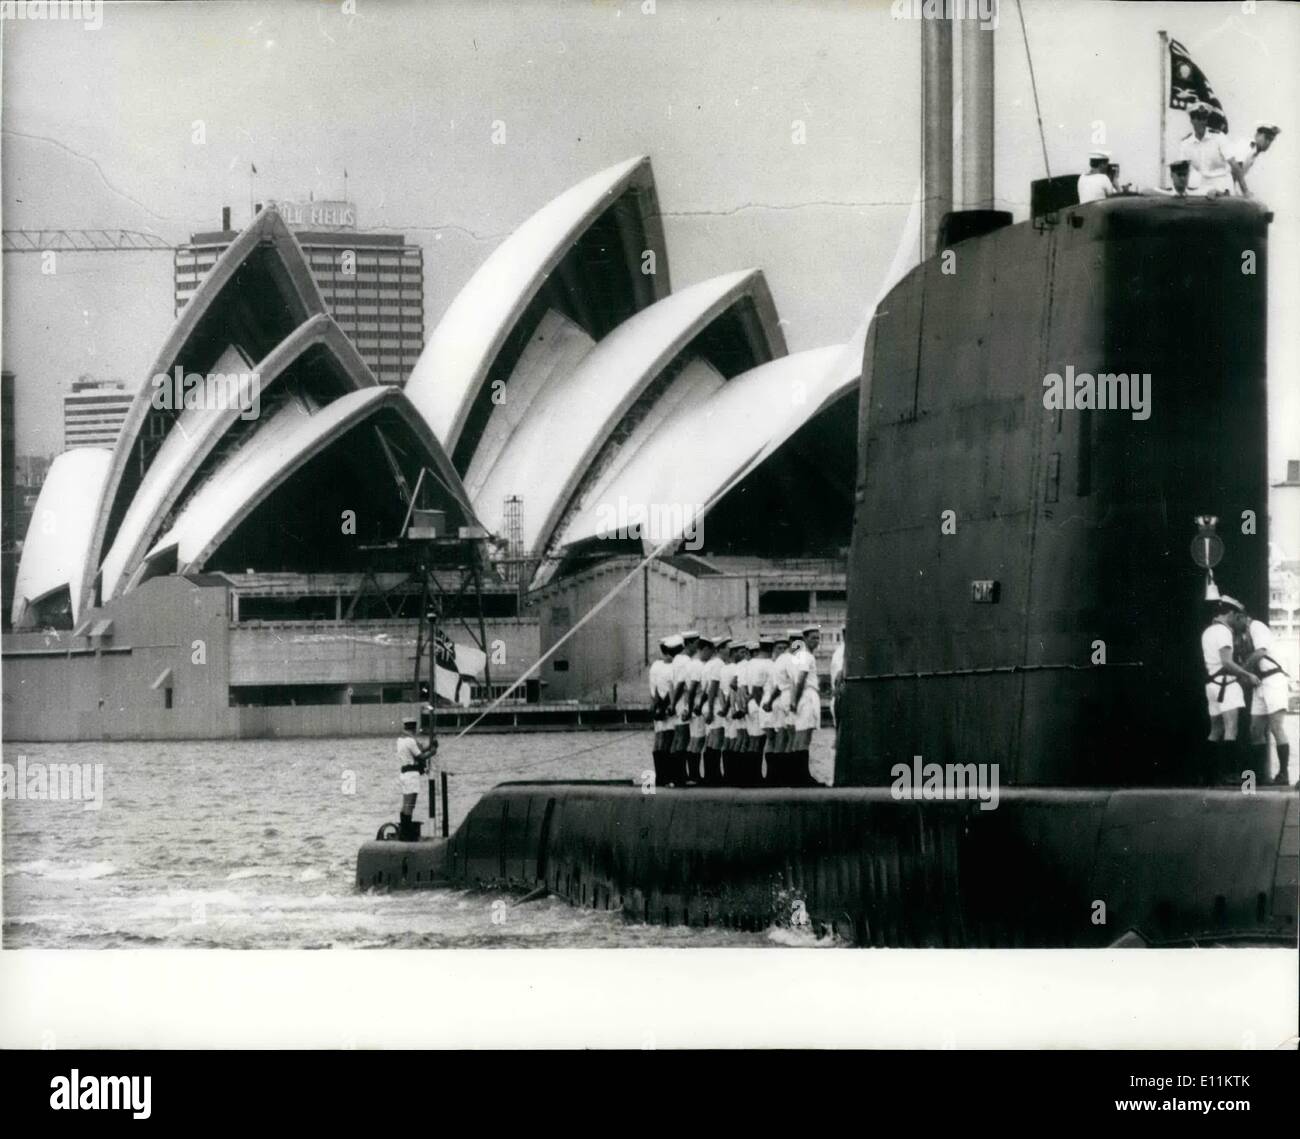 Jan. 01, 1979 - EXIT THE ROYAL NAVY - FLYING THE JOLLY ROGER, Flying the J lly Roger, HMS TRUMP - the last British link with the Royal Australian Navy - sailed out of Sydney recently. The J,11y Roger one the pr,ud emblem of her victriee in World War II, She was the laet Brit/Ai sub to sink an enemy veaeel, For the 65-man area it was the last goodbye to Sydney. The Trump was going home to the wreckers, And with her departure Australia will go. it alone - with her own submarine service. The first moves to give Australia an independent navy date back to 1913 Stock Photo